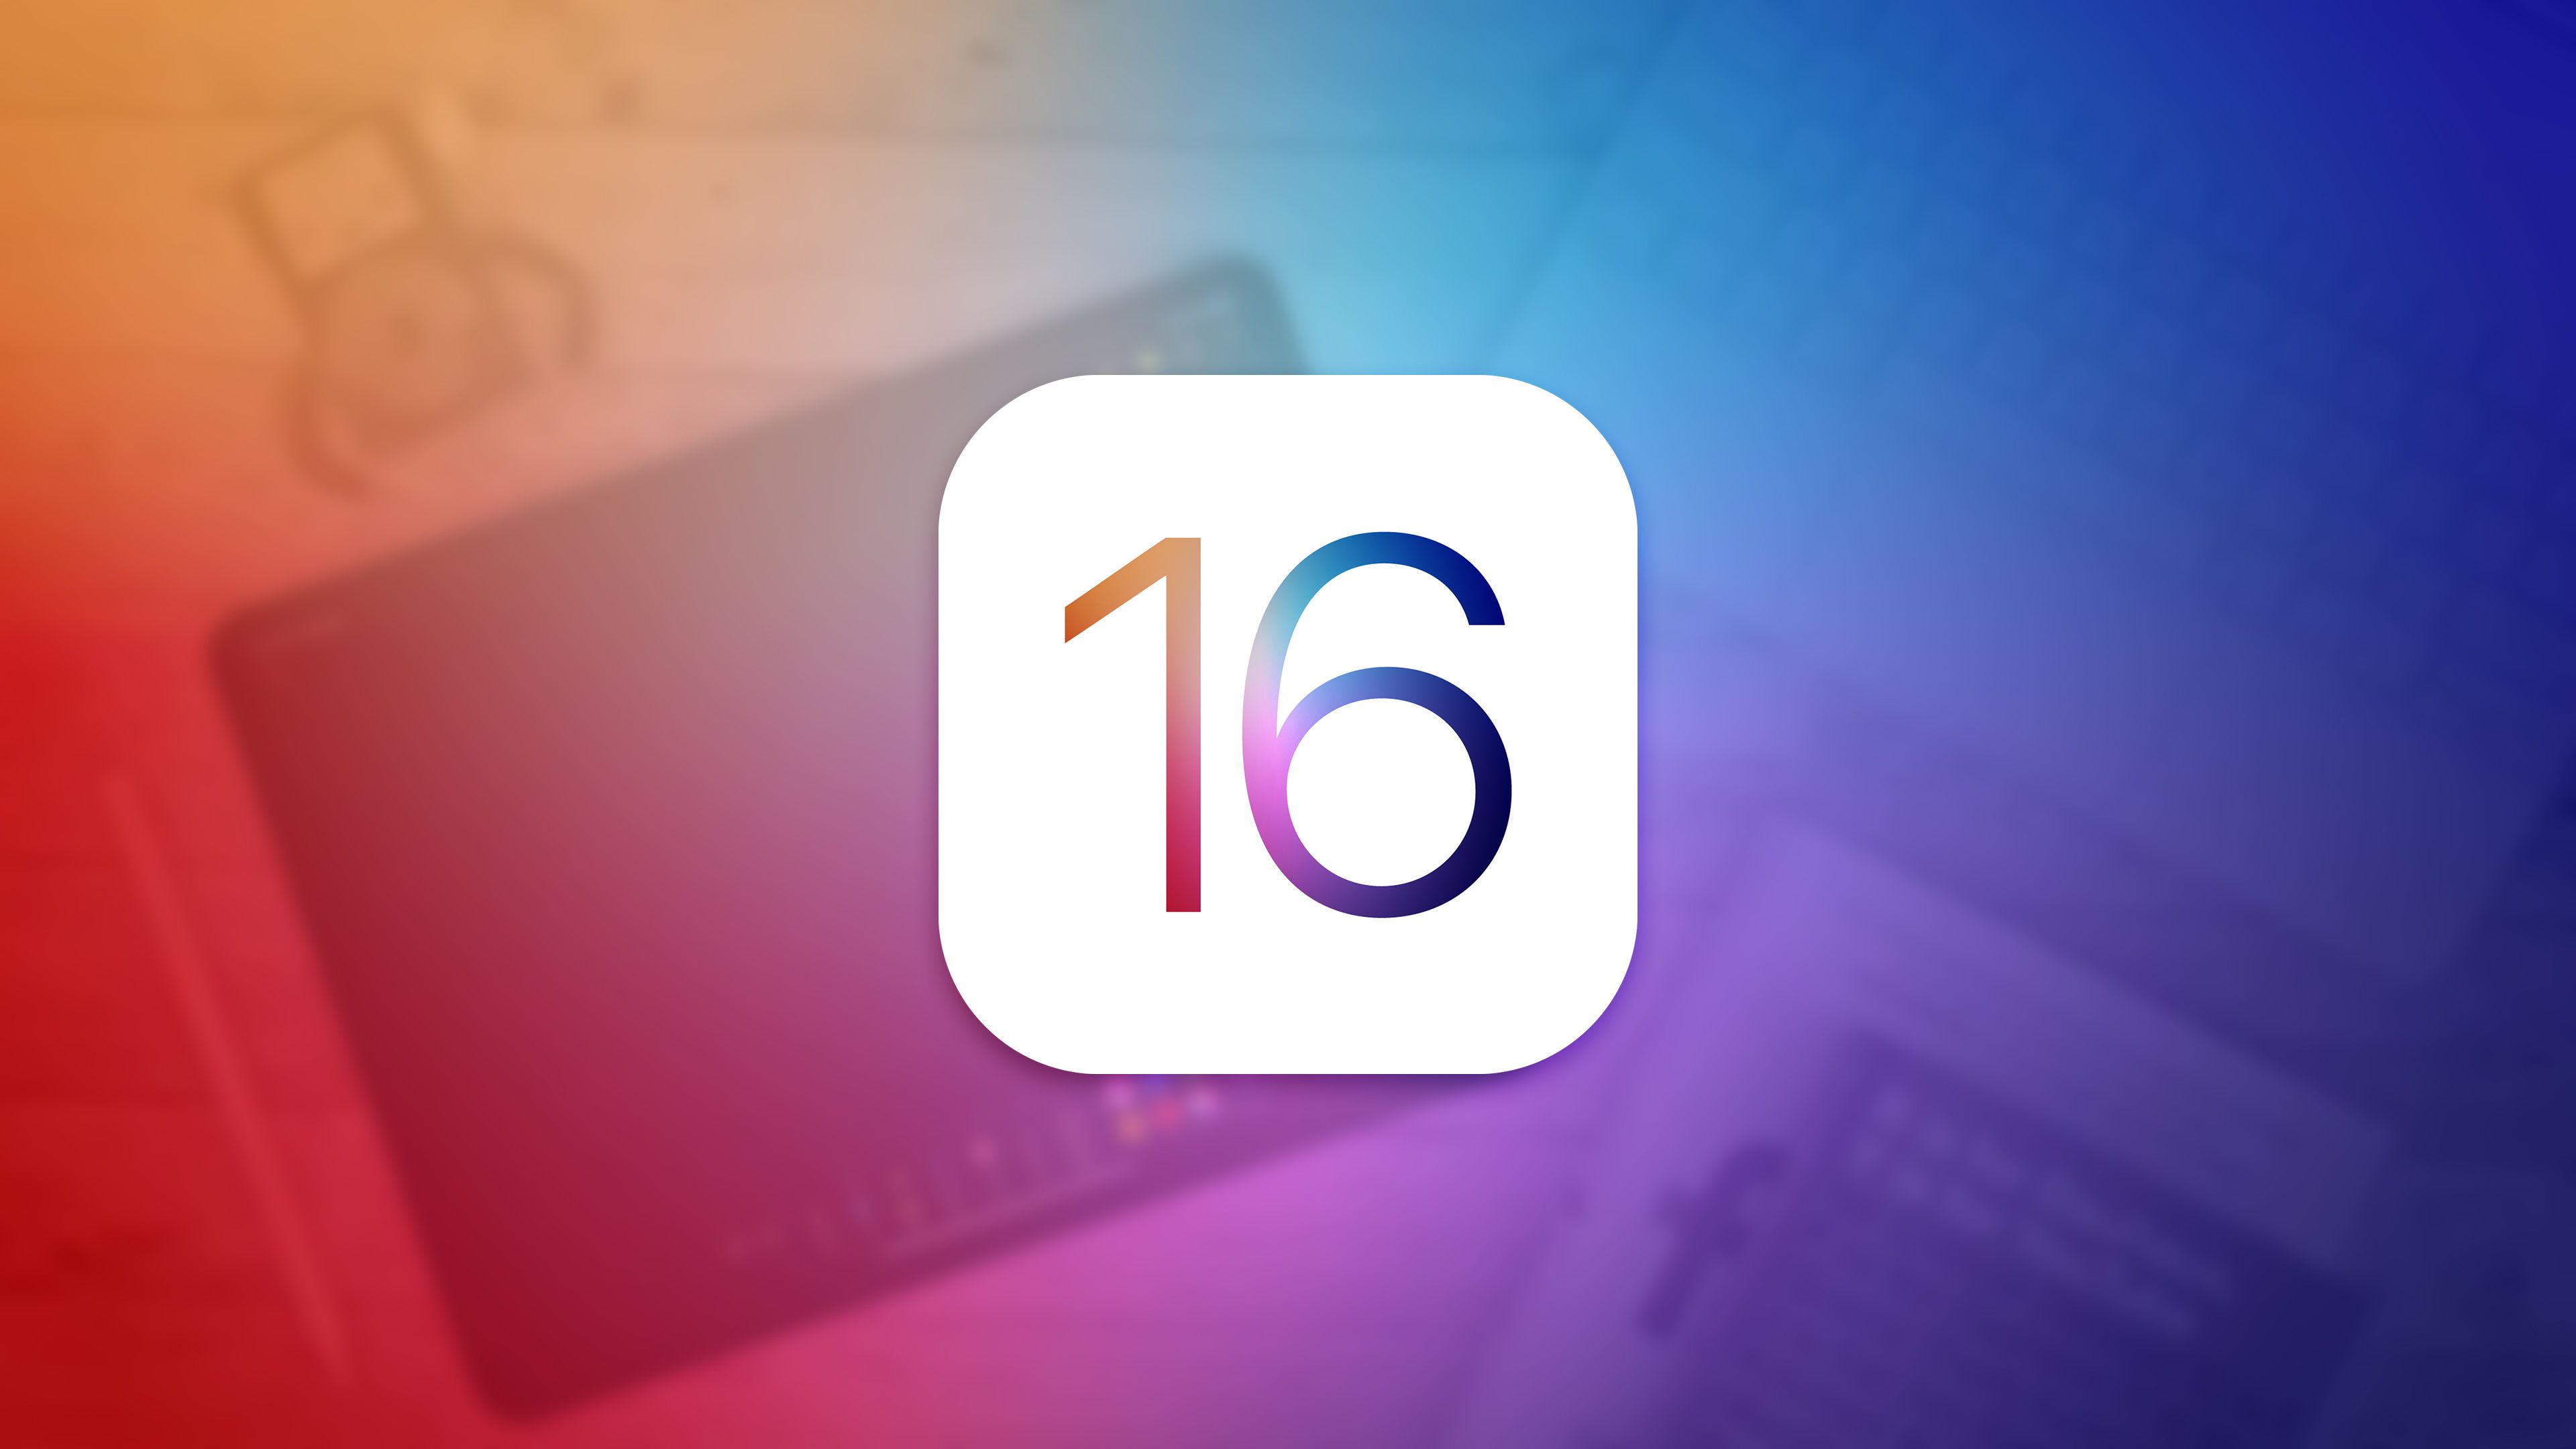 iOS 16 Wishlist: Features MacRumors Readers Want to See in the Next Version of iOS